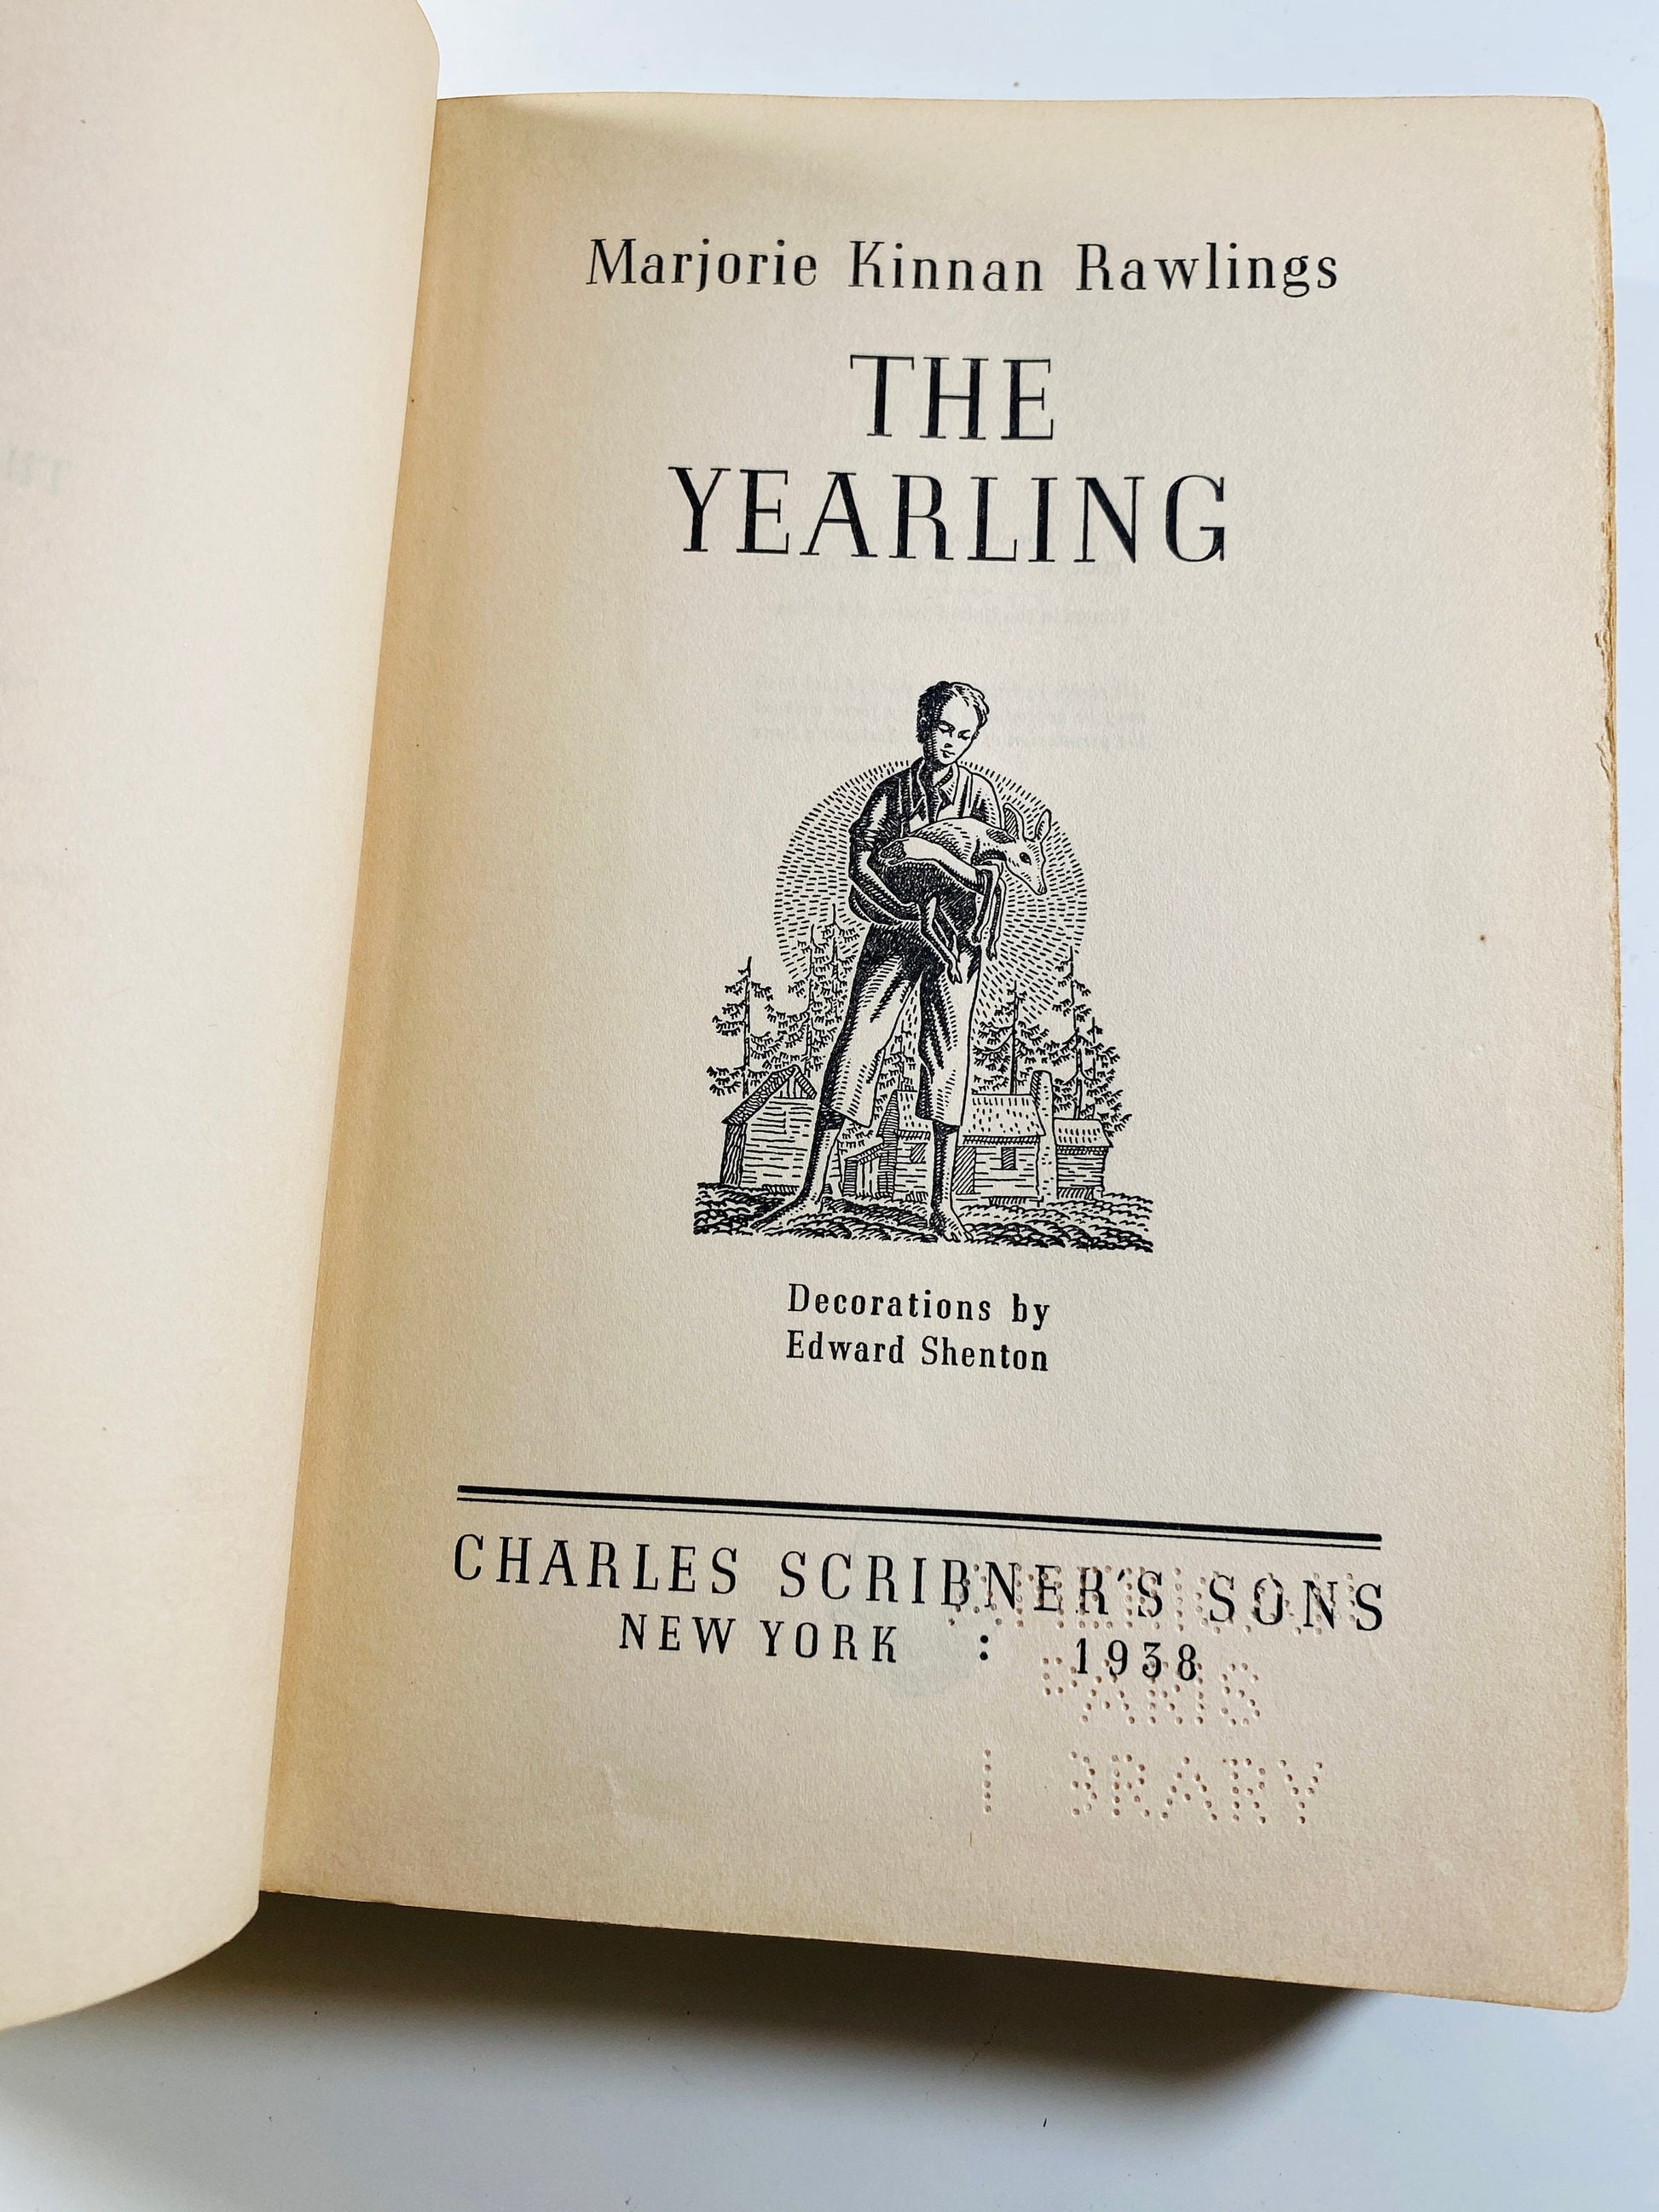 The Yearling FIRST EDITION Vintage Marjorie Kennan Rawlings book circa 1938. Pulitzer Prize Iconic novel set about fawn in northern Florida